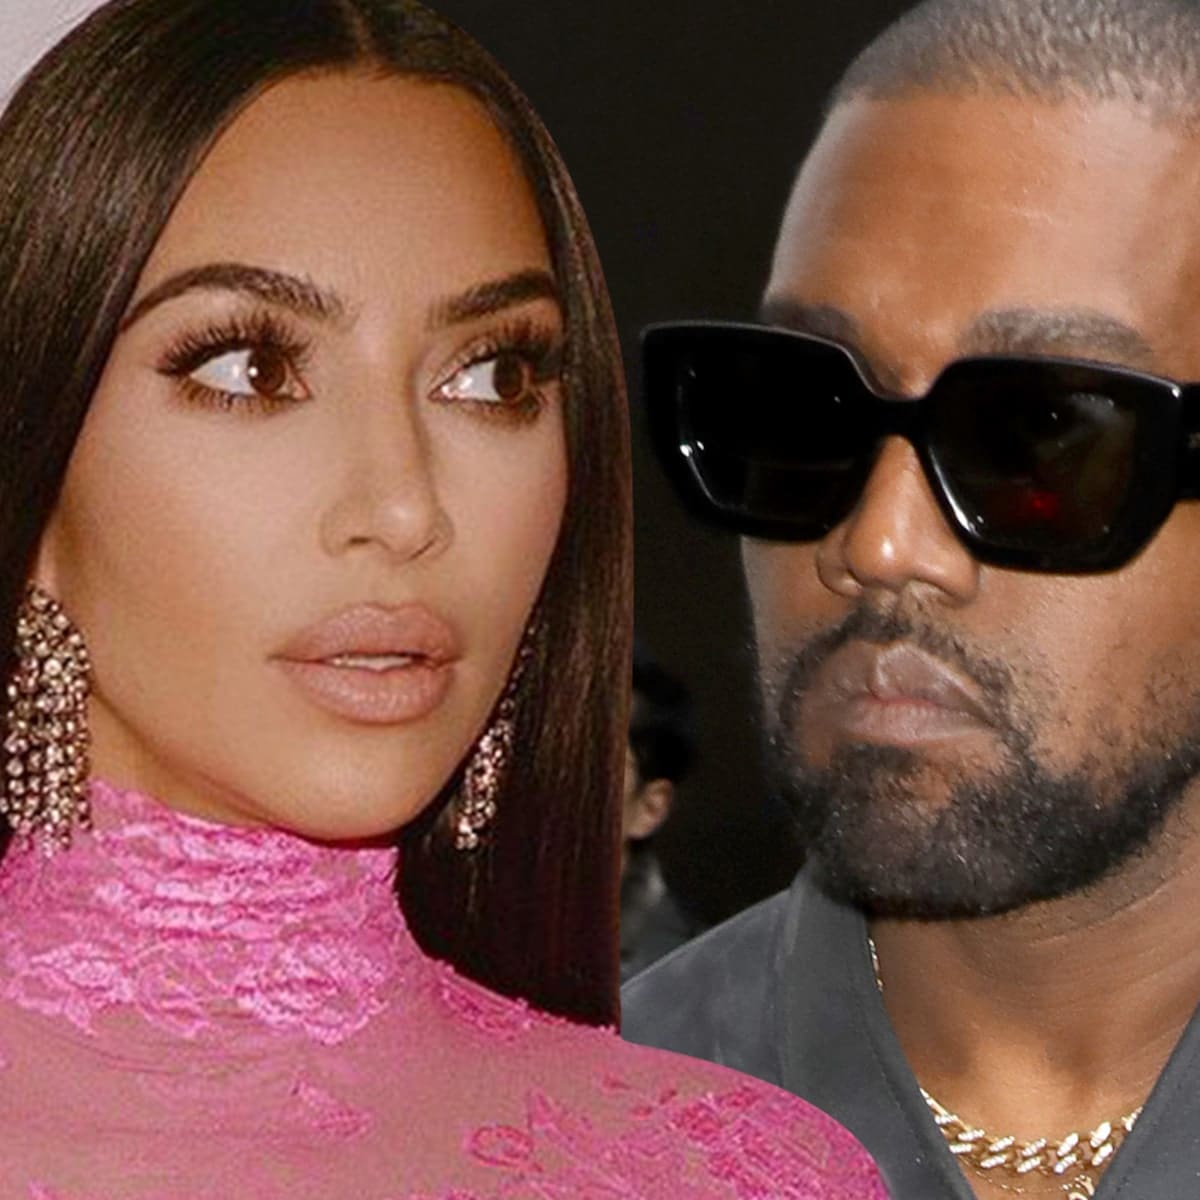 ”ray-j-addressed-viral-clip-of-kanye-west-and-kim-kardashian-lil-duval-weighs-in-on-the-situation”